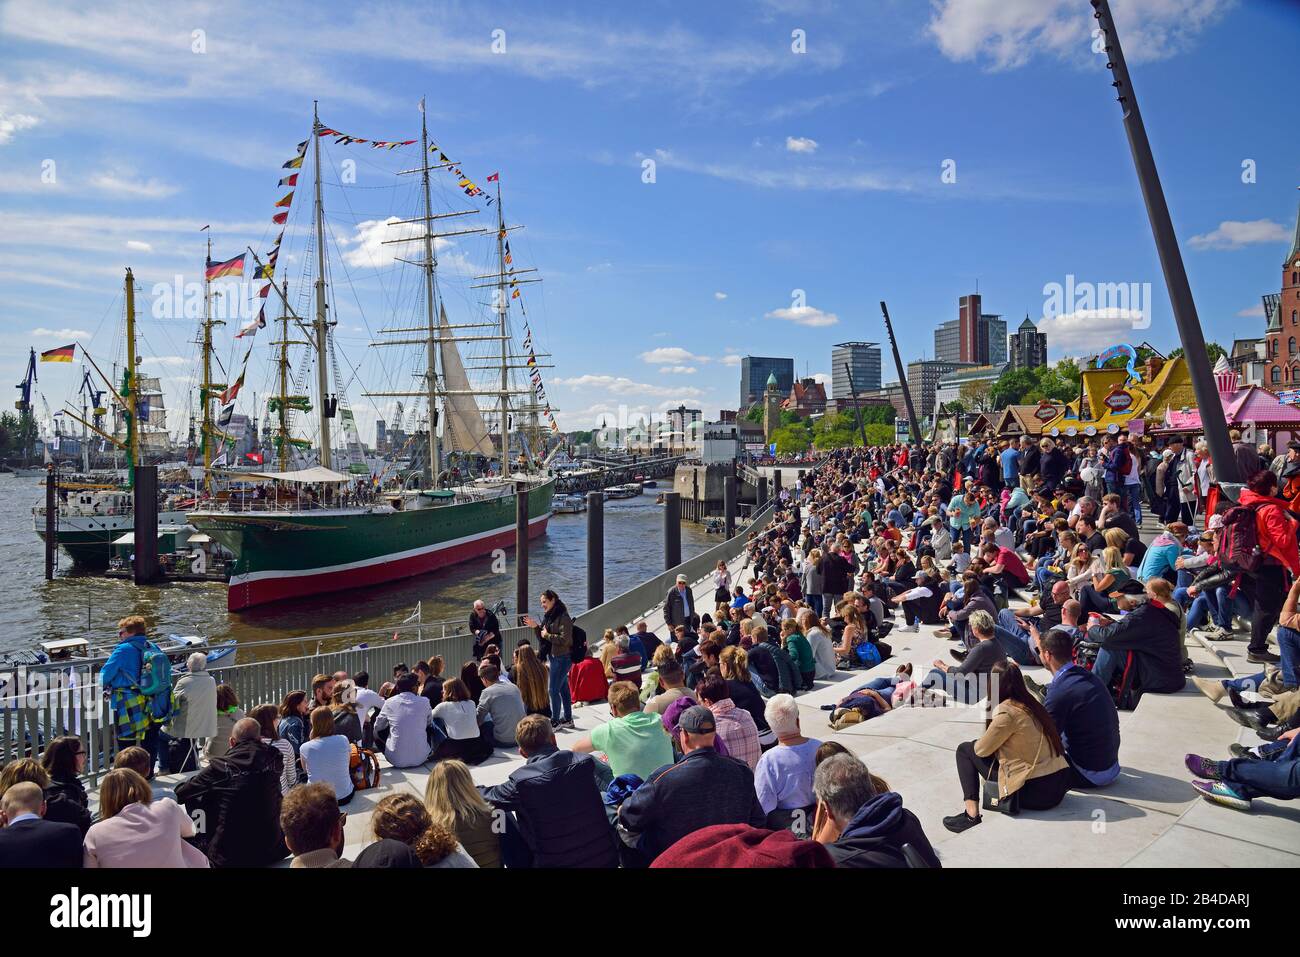 Europe, Germany, Hanseatic city of Hamburg, harbor, Baumwall, flood protection system, flood protection wall with integrated promenade, visitor to the port birthday, windjammer Rickmer Rickmers, museum ship, Stock Photo